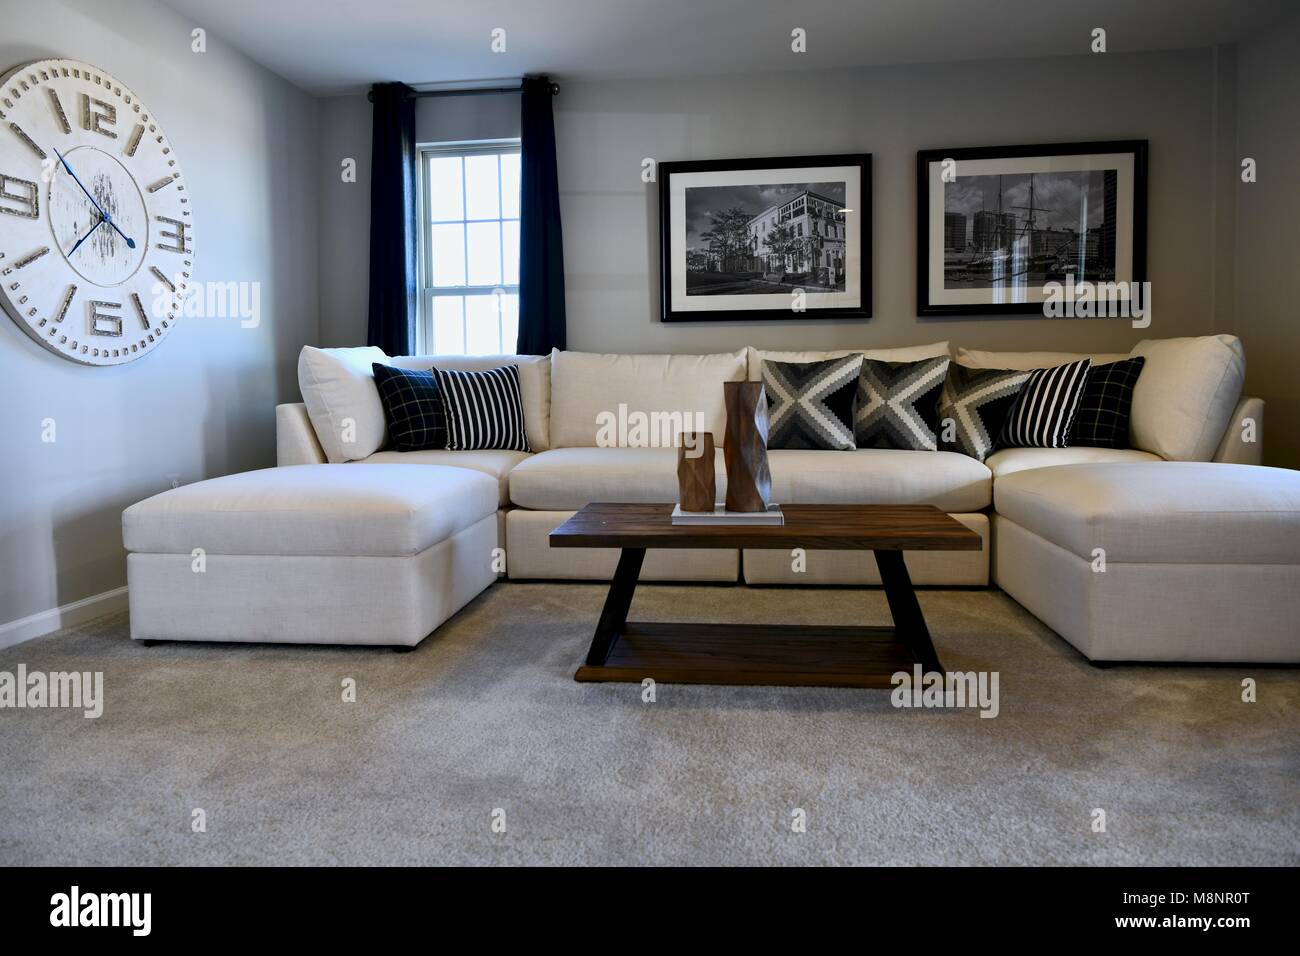 Living room with white sectional and modern decor on the walls Stock Photo